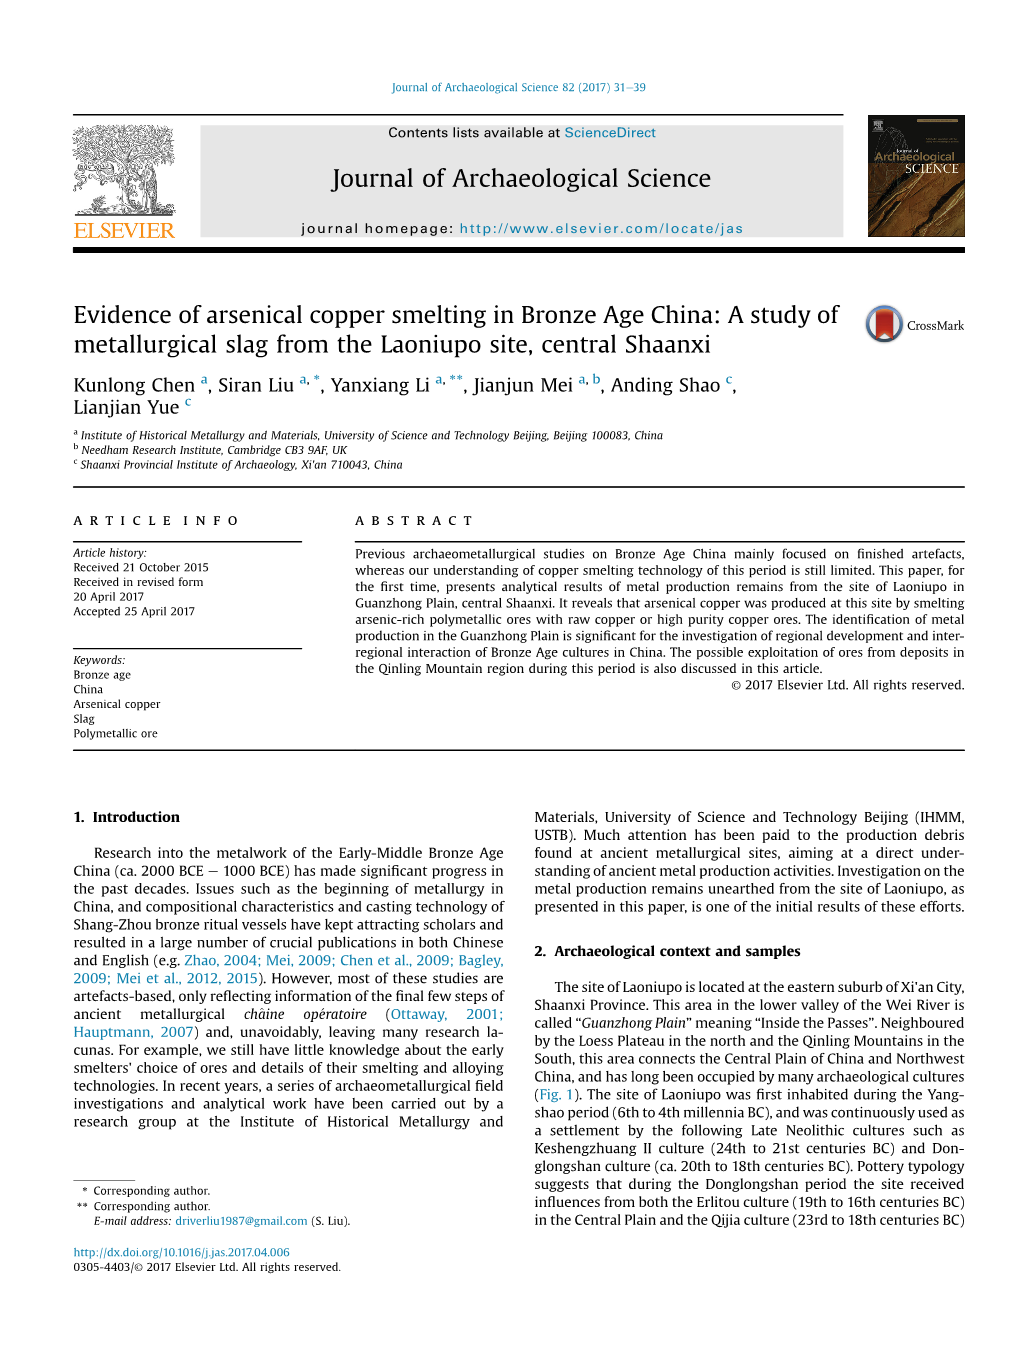 Evidence of Arsenical Copper Smelting in Bronze Age China: a Study of Metallurgical Slag from the Laoniupo Site, Central Shaanxi